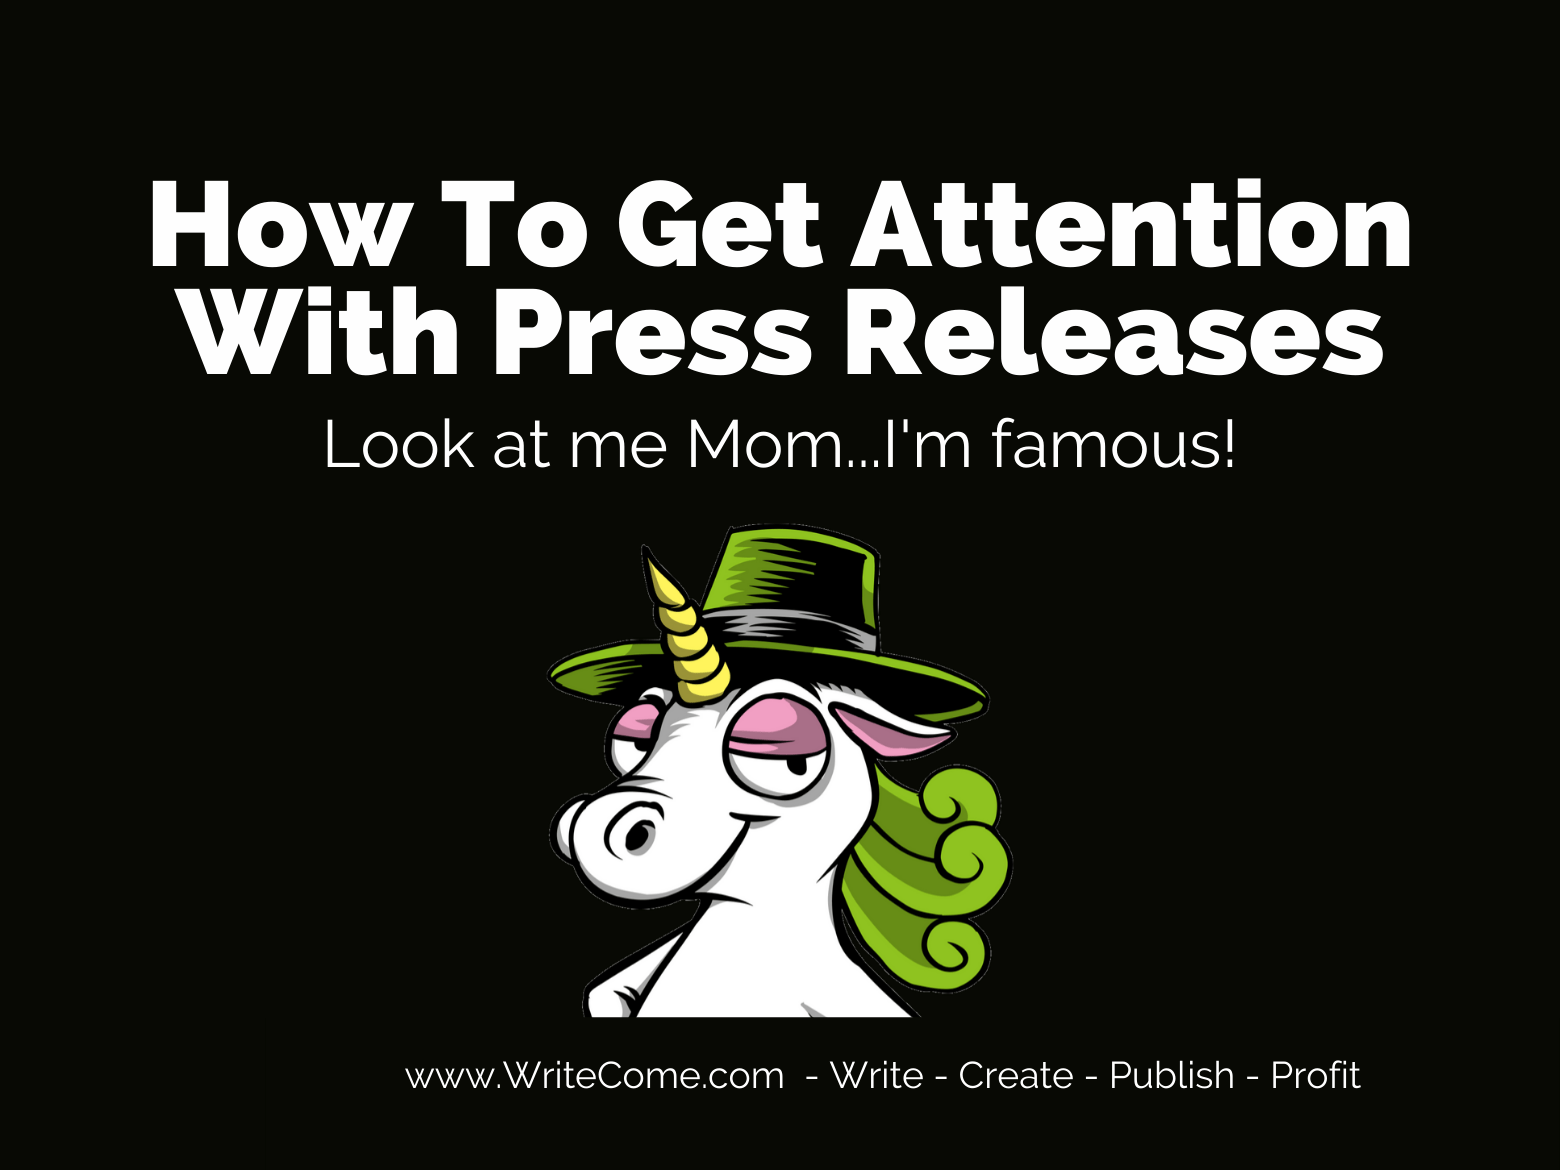 How To Get Attention With Press Releases